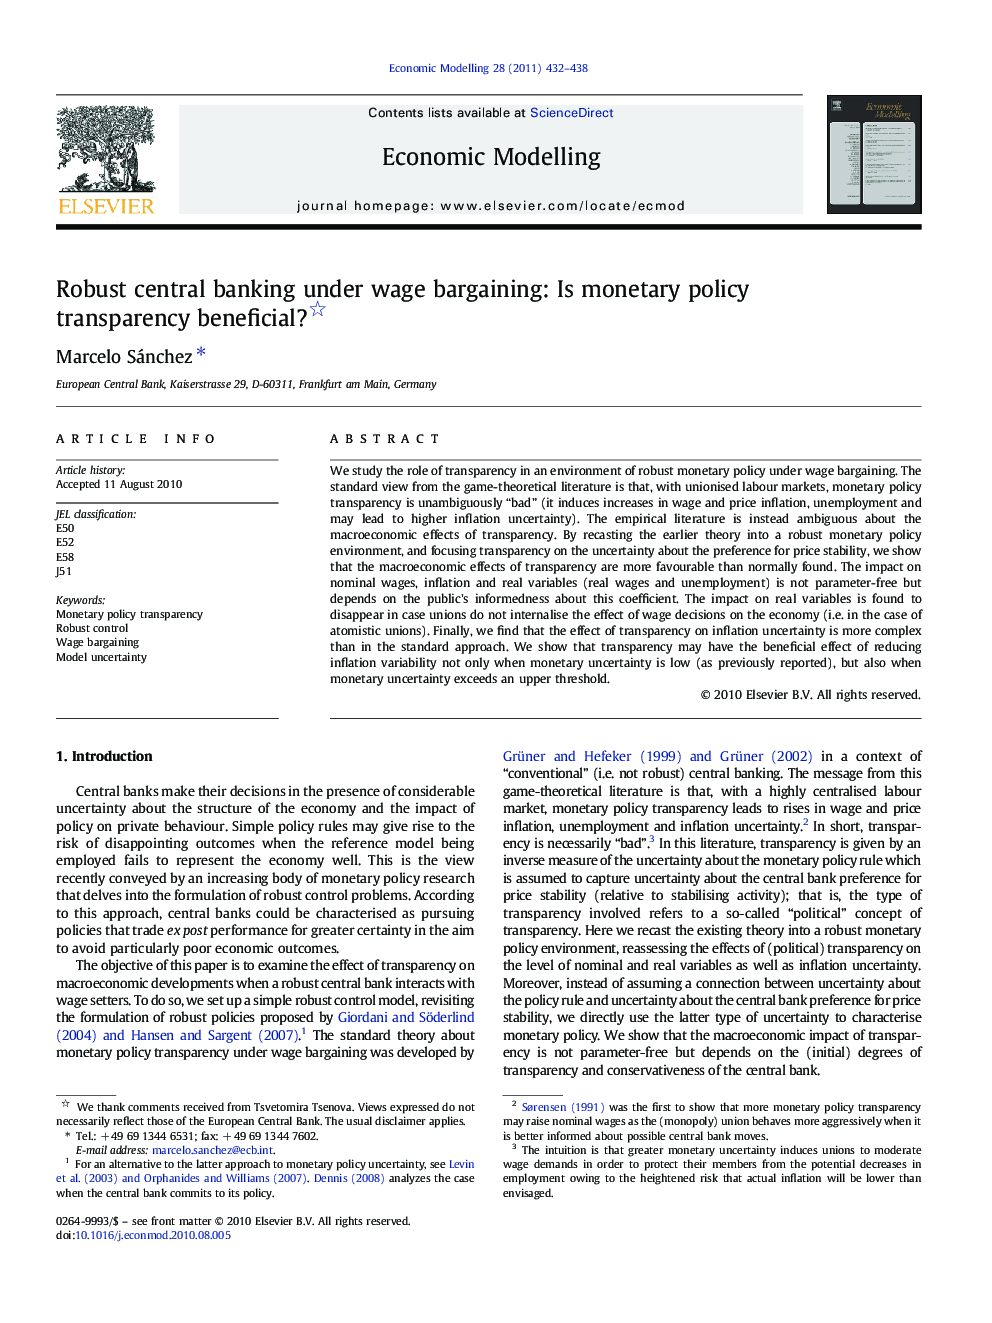 Robust central banking under wage bargaining: Is monetary policy transparency beneficial?